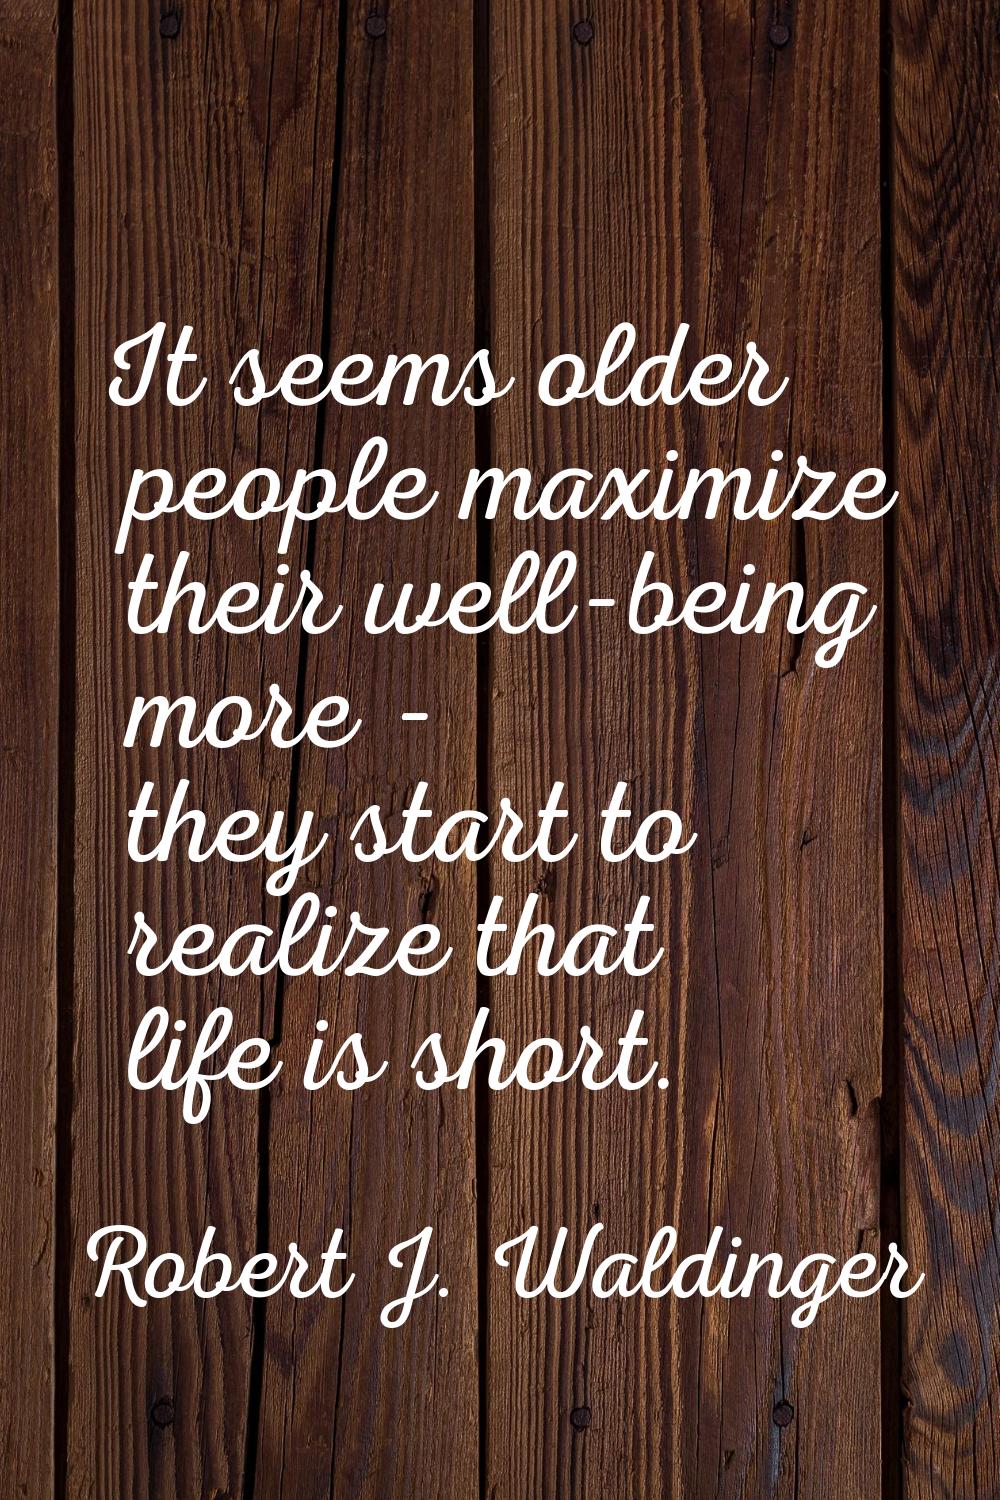 It seems older people maximize their well-being more - they start to realize that life is short.